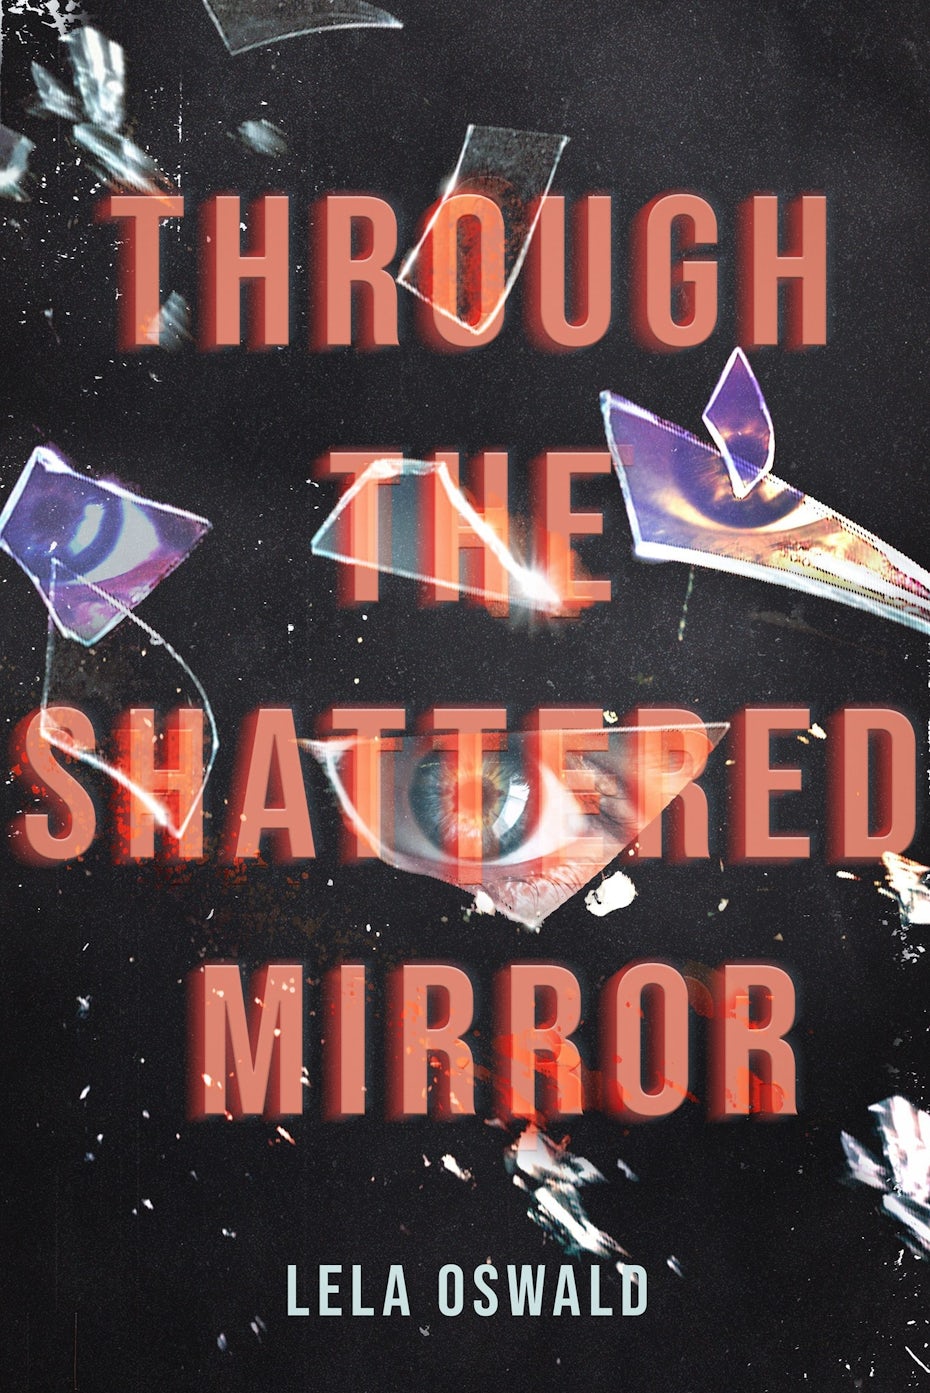 gray book cover with red text and images of eyes and shattered glass